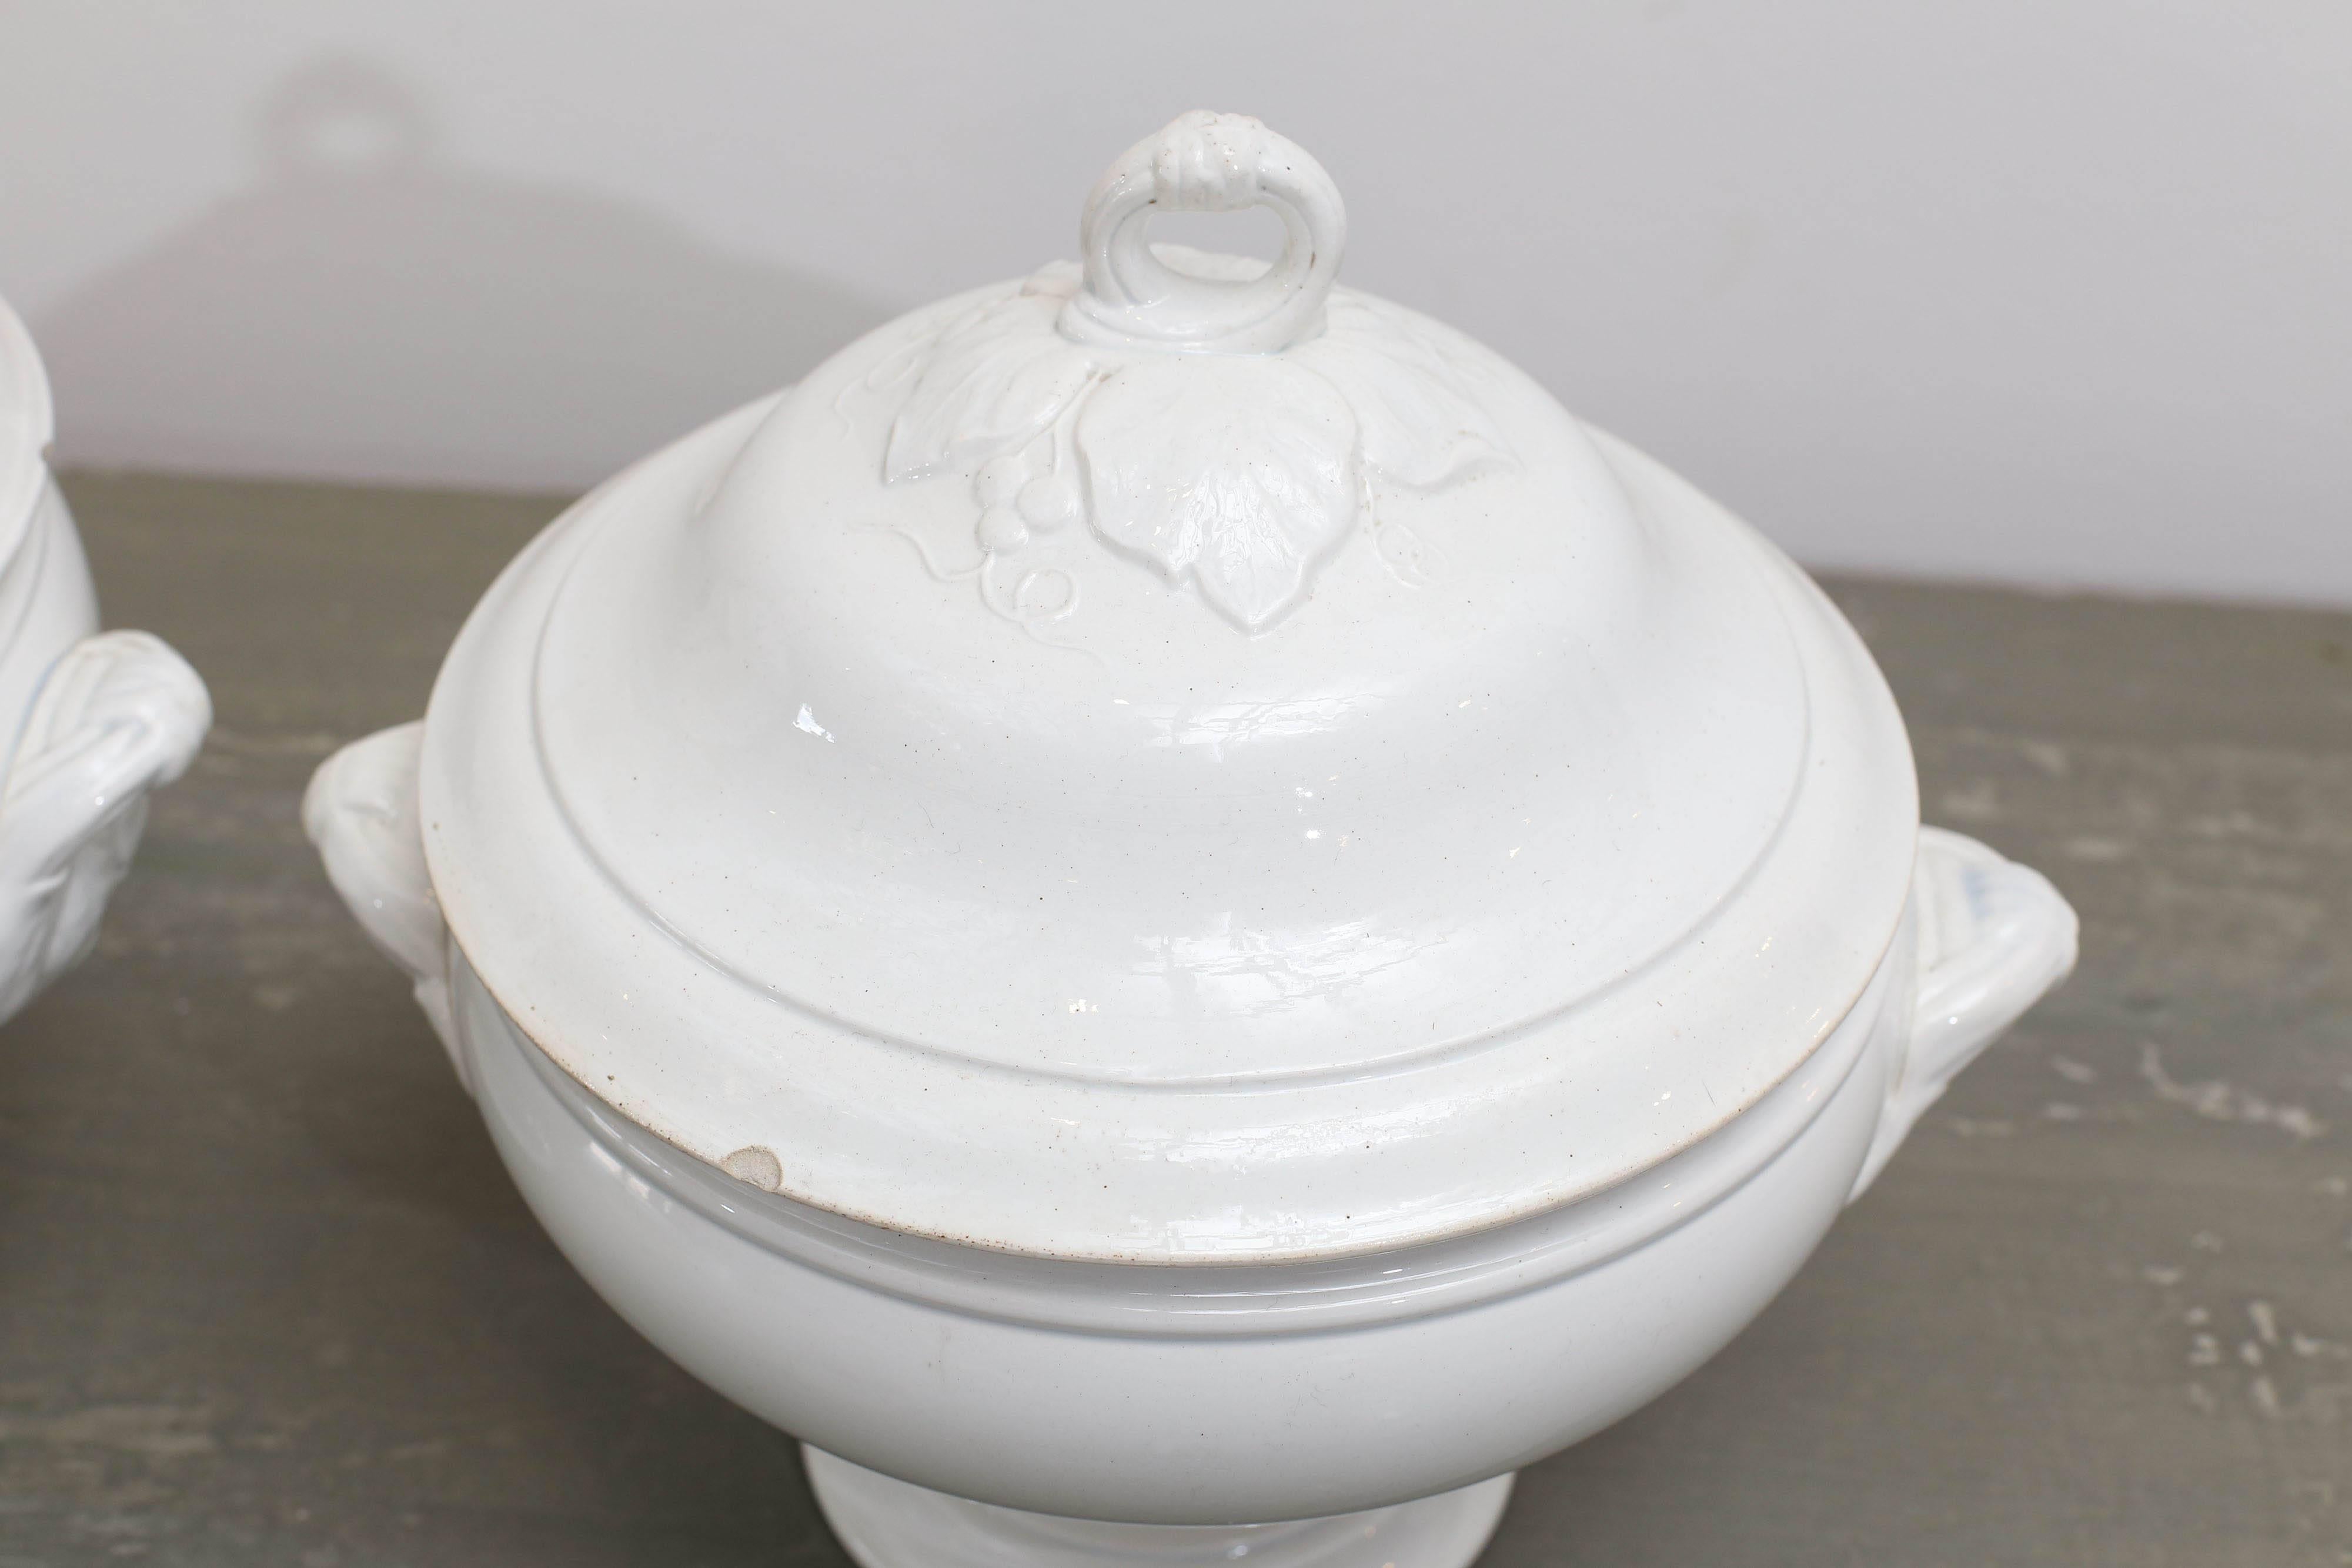 19th century Belgian white soup tureens.  Chips on covers.

Measures: Left tureen: Height 11.5